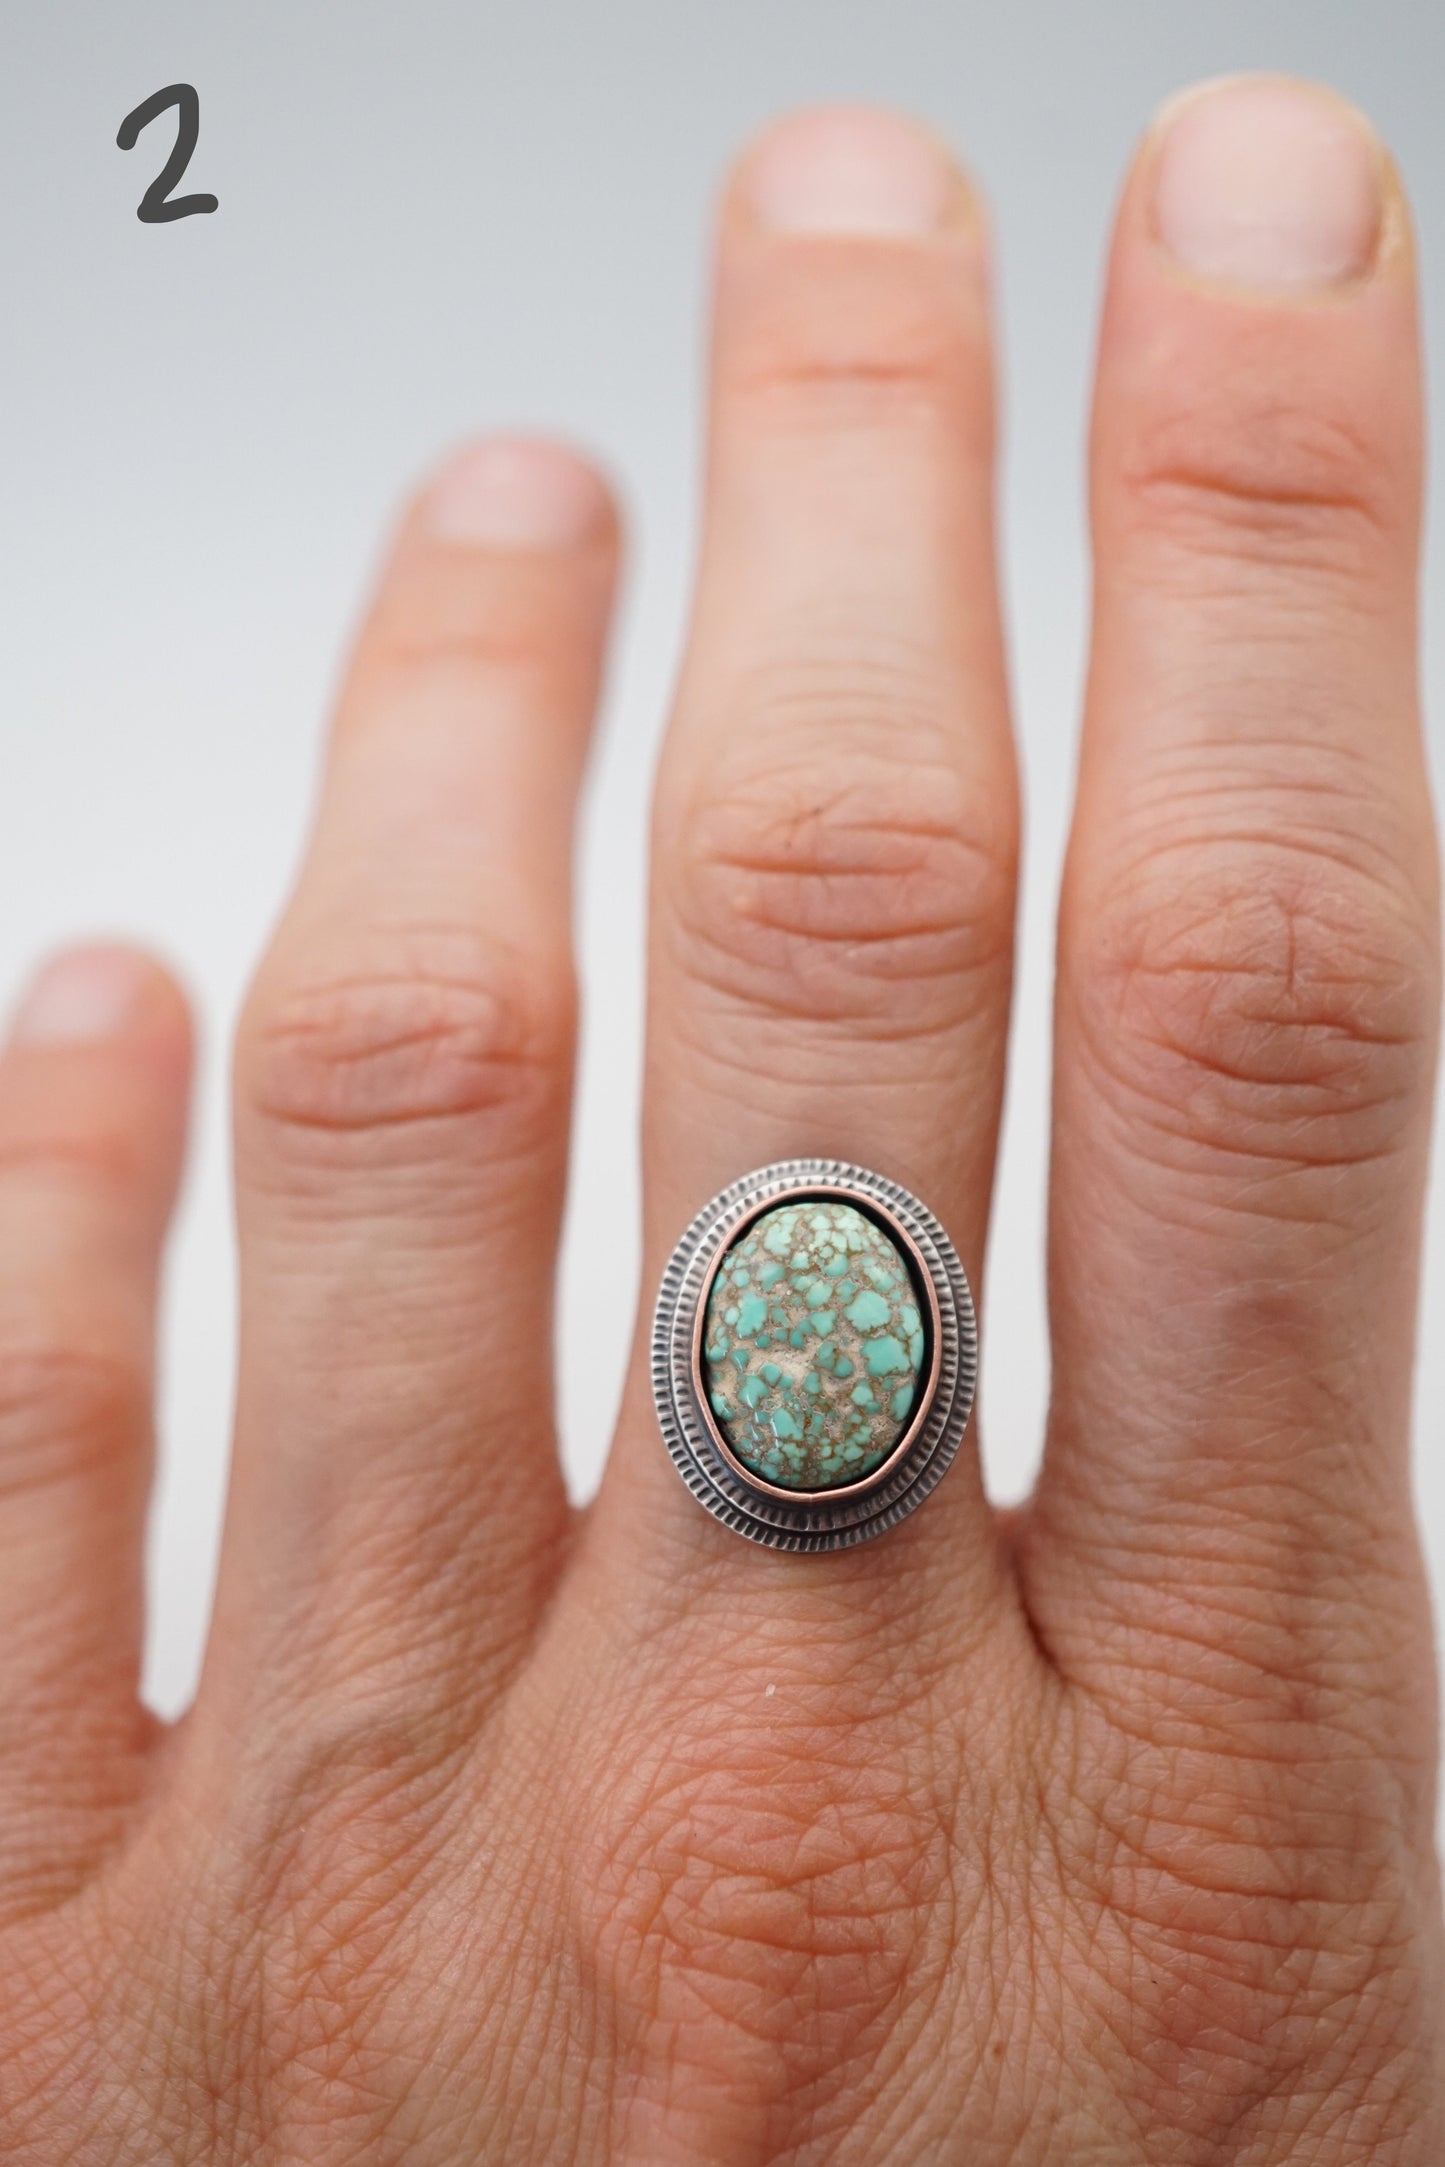 copper bezel rings made to order in your size - Lumenrose